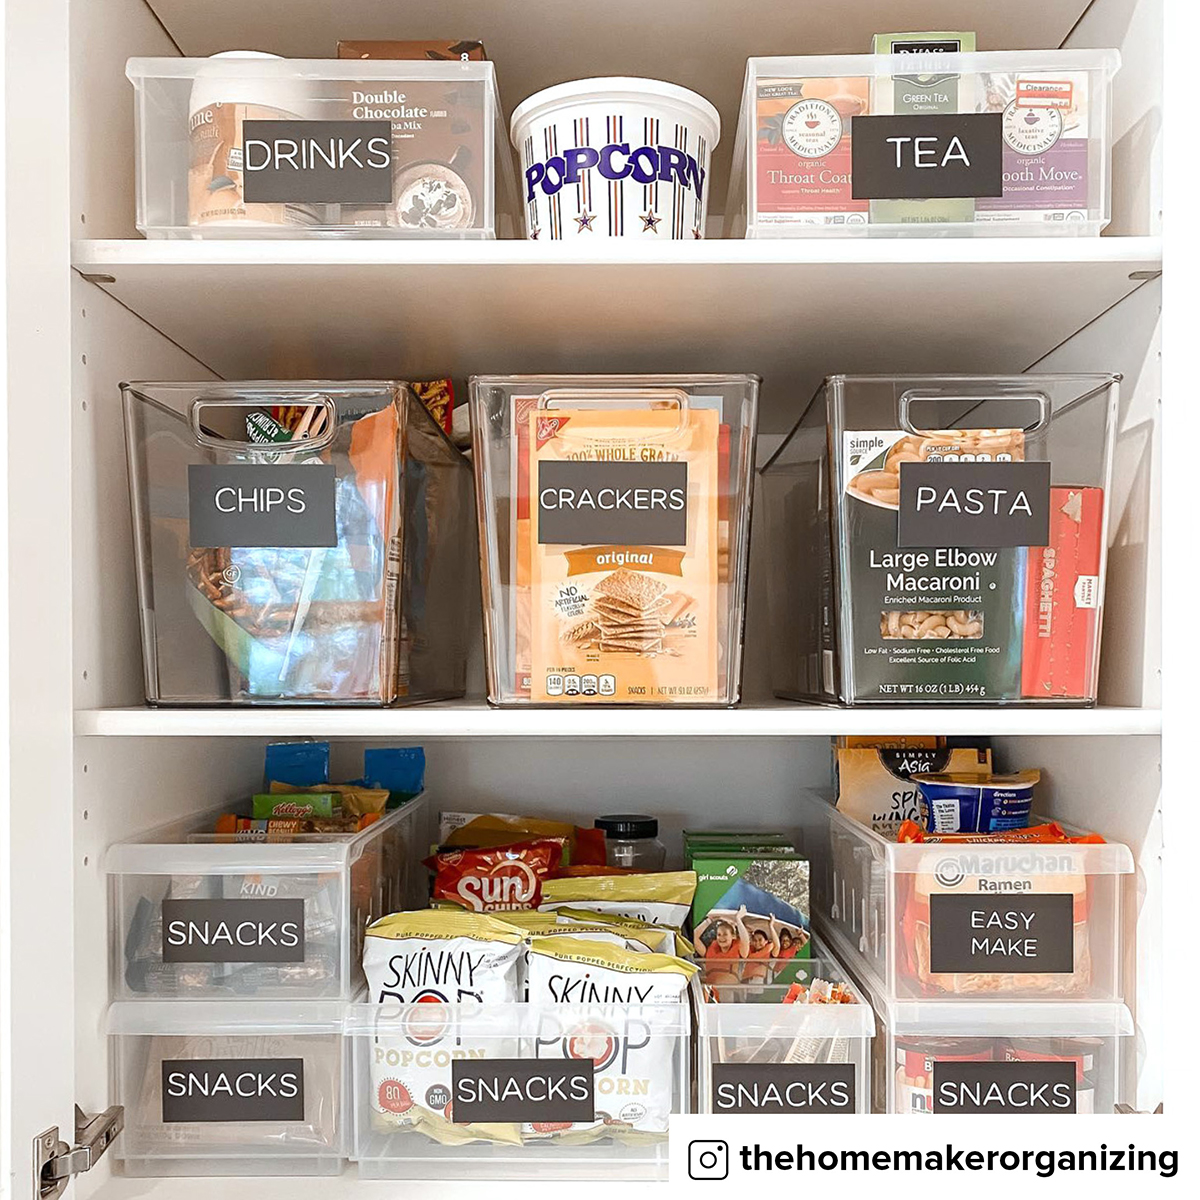 https://www.containerstore.com/catalogimages/416911/thehomemakerorganizing.jpg